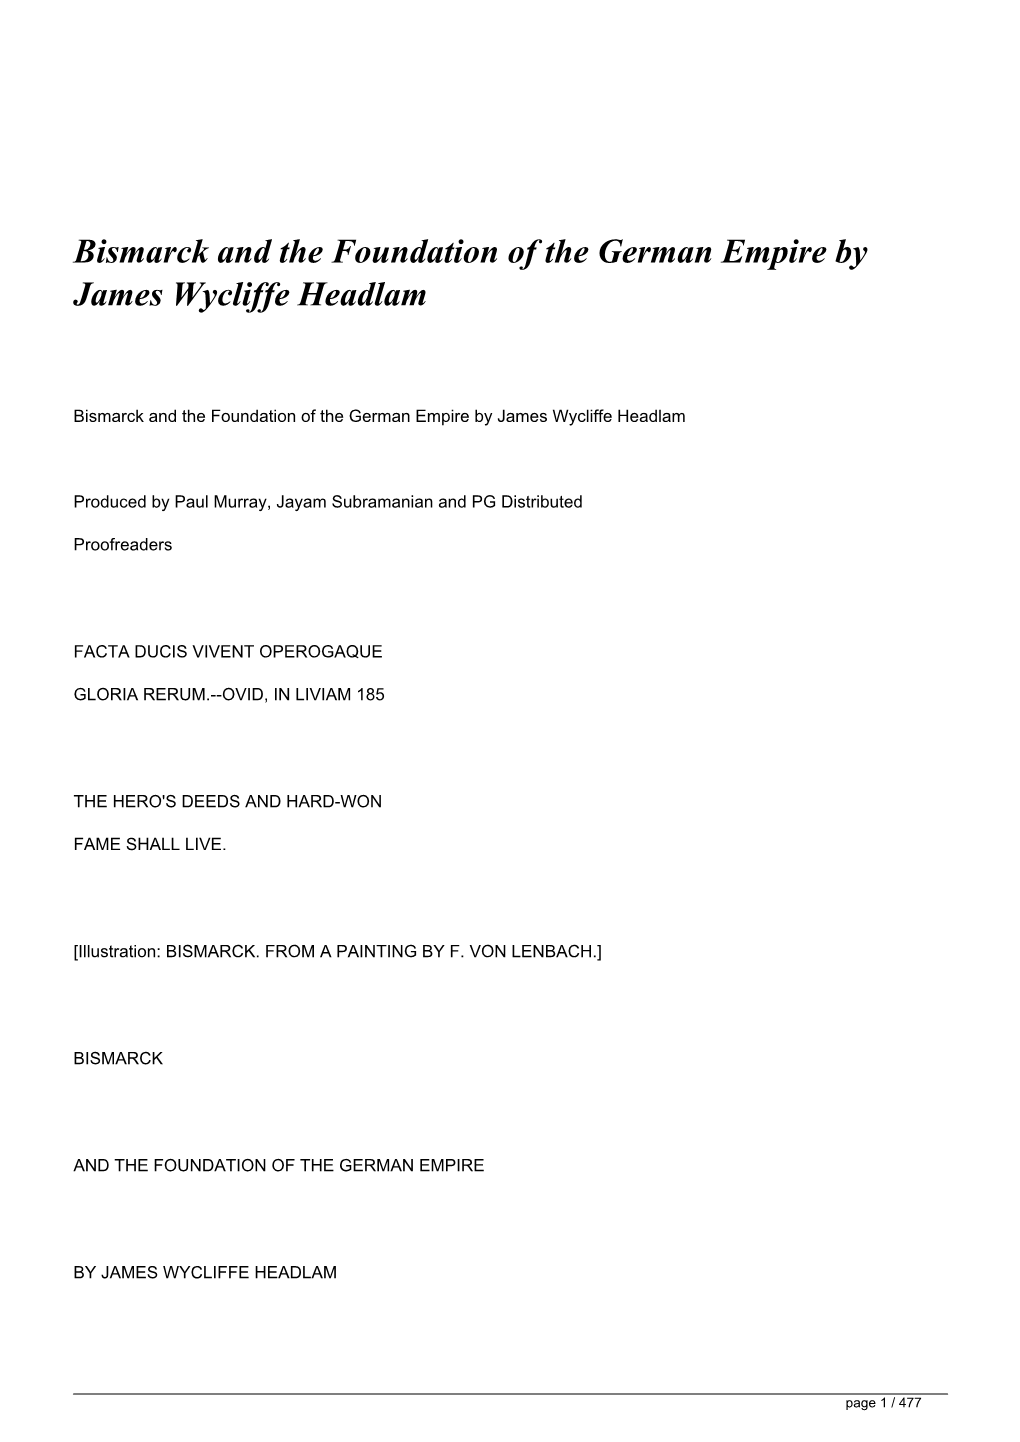 Bismarck and the Foundation of the German Empire by James Wycliffe Headlam